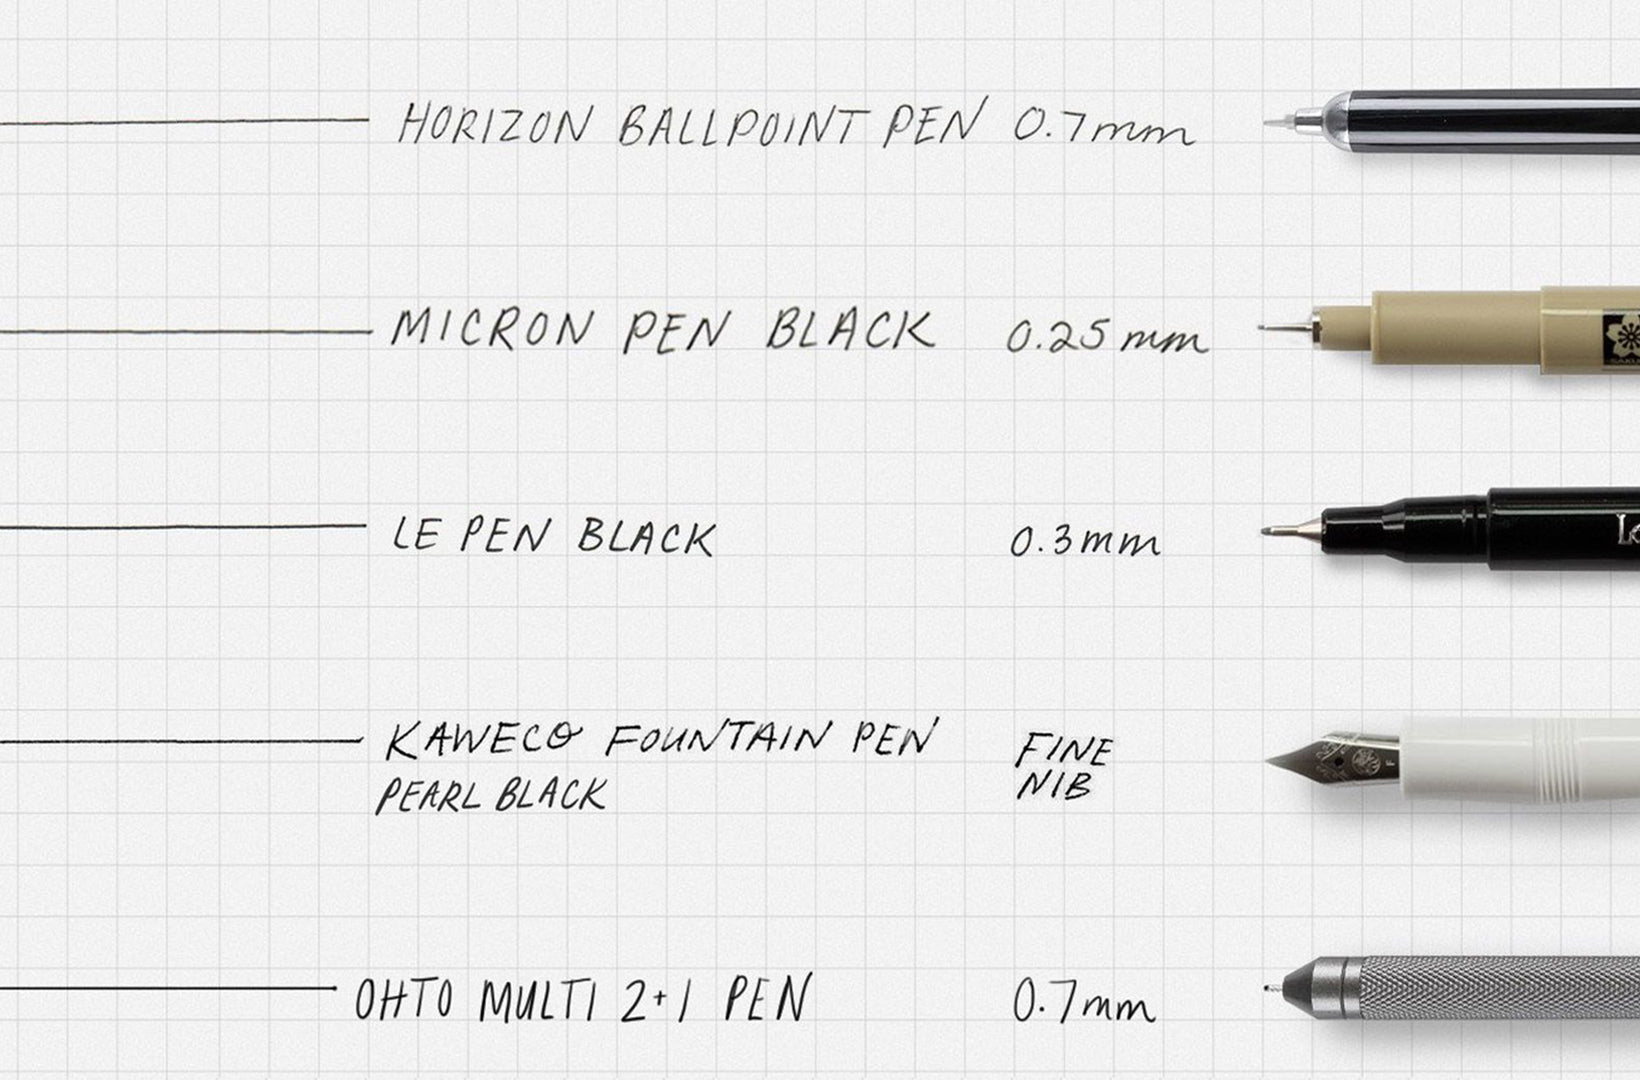 A pen test shows the performance of various pen types against the kaweco skyline sport